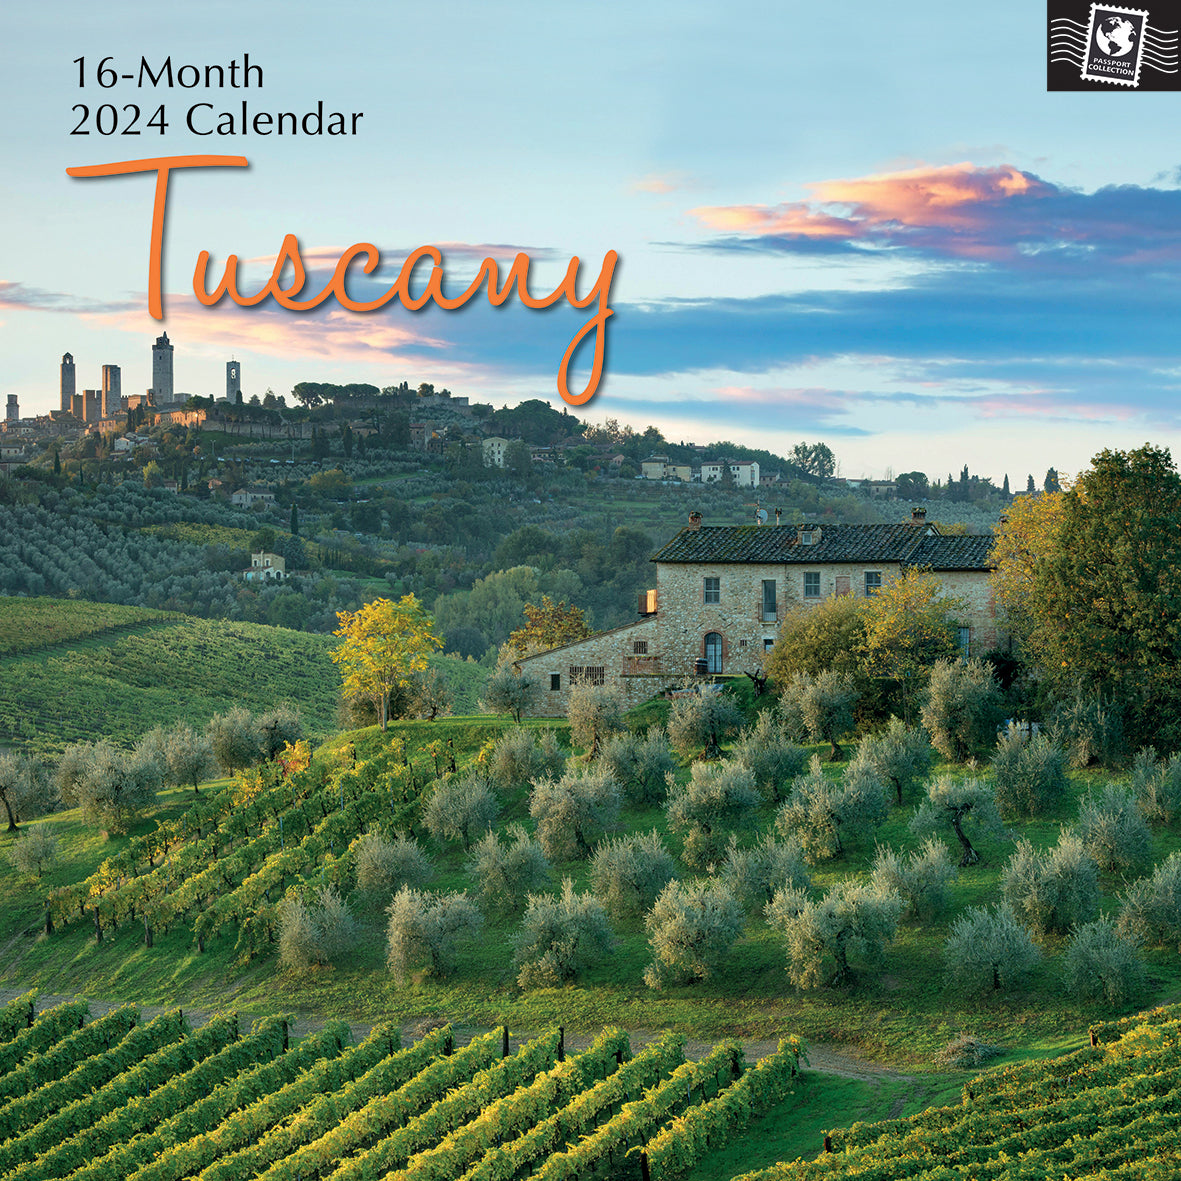 Tuscany - 2024 Square Wall Calendar 16 Months Premium Planner Xmas New Year Gift